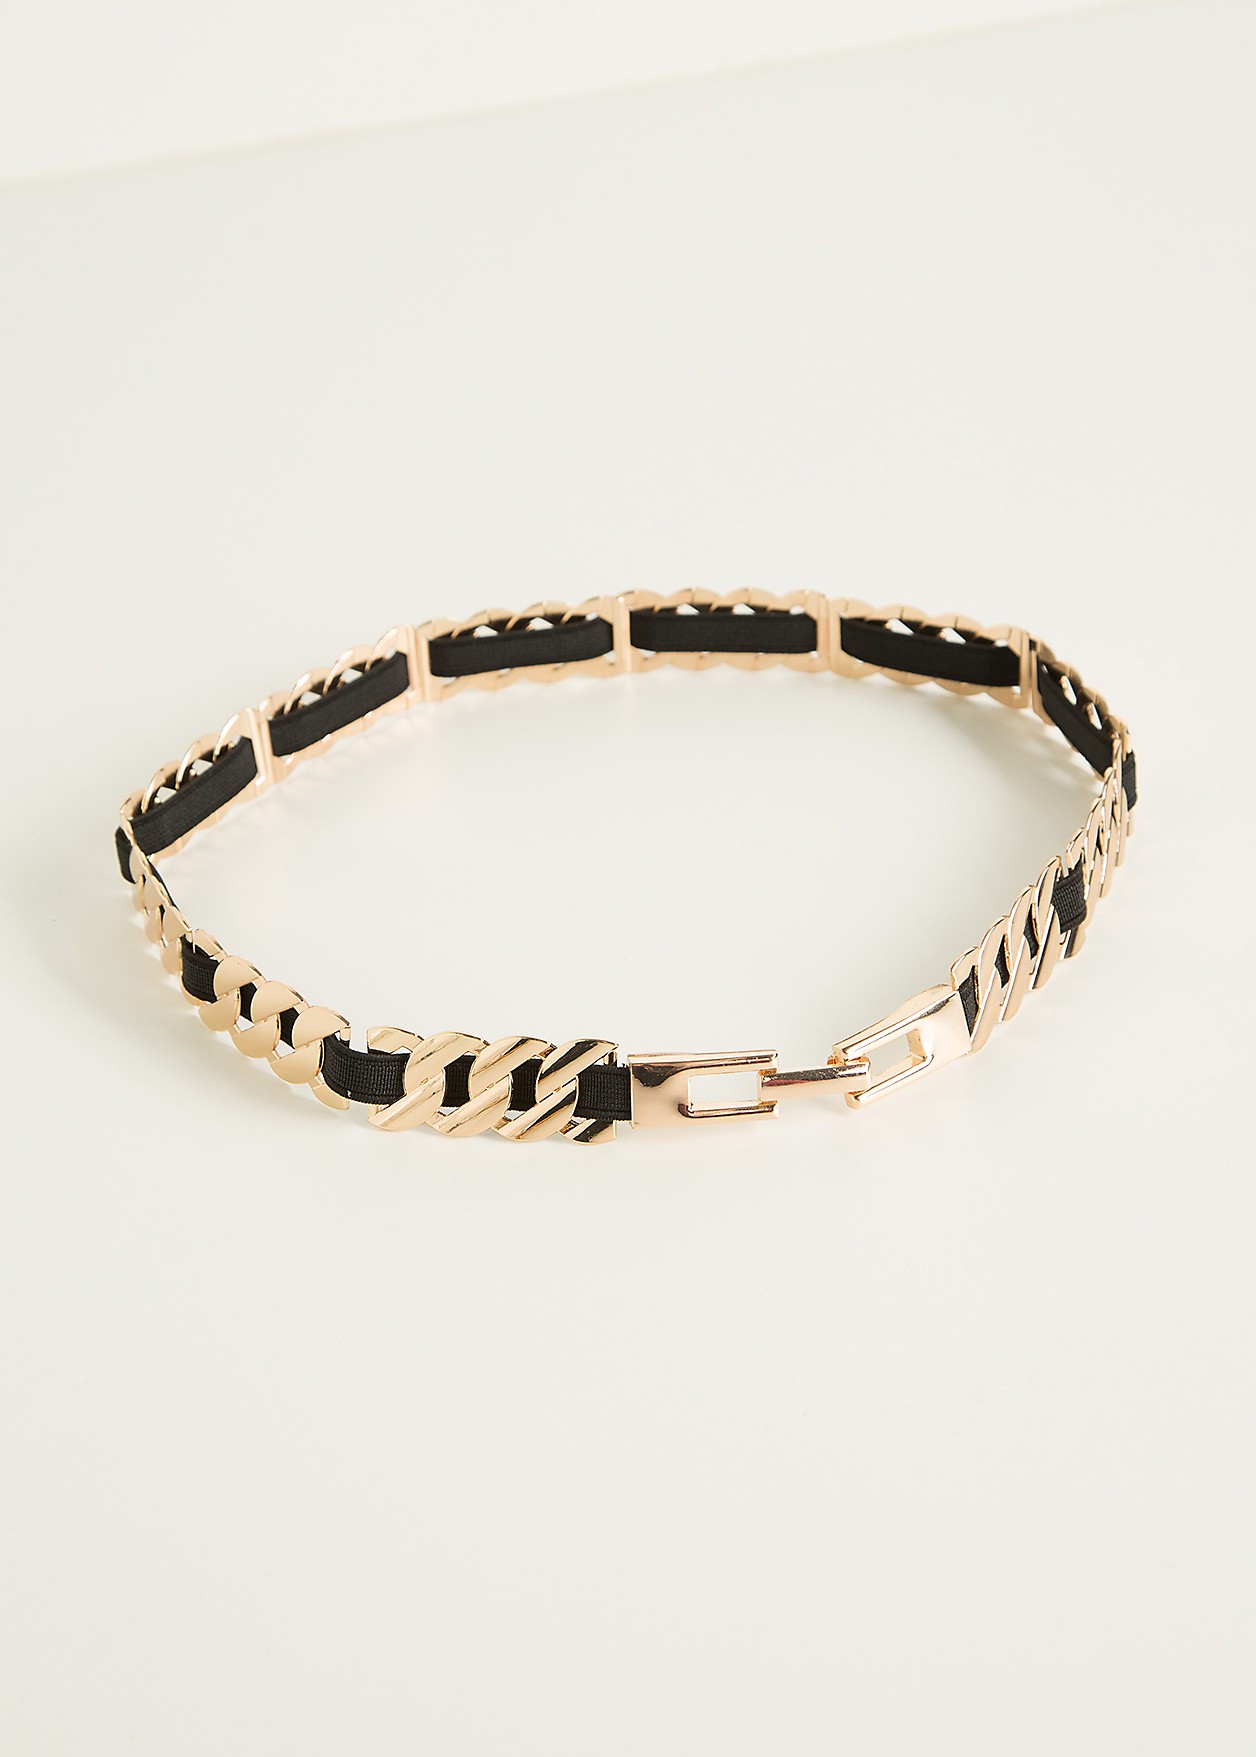 Elastic belt with metal chain details